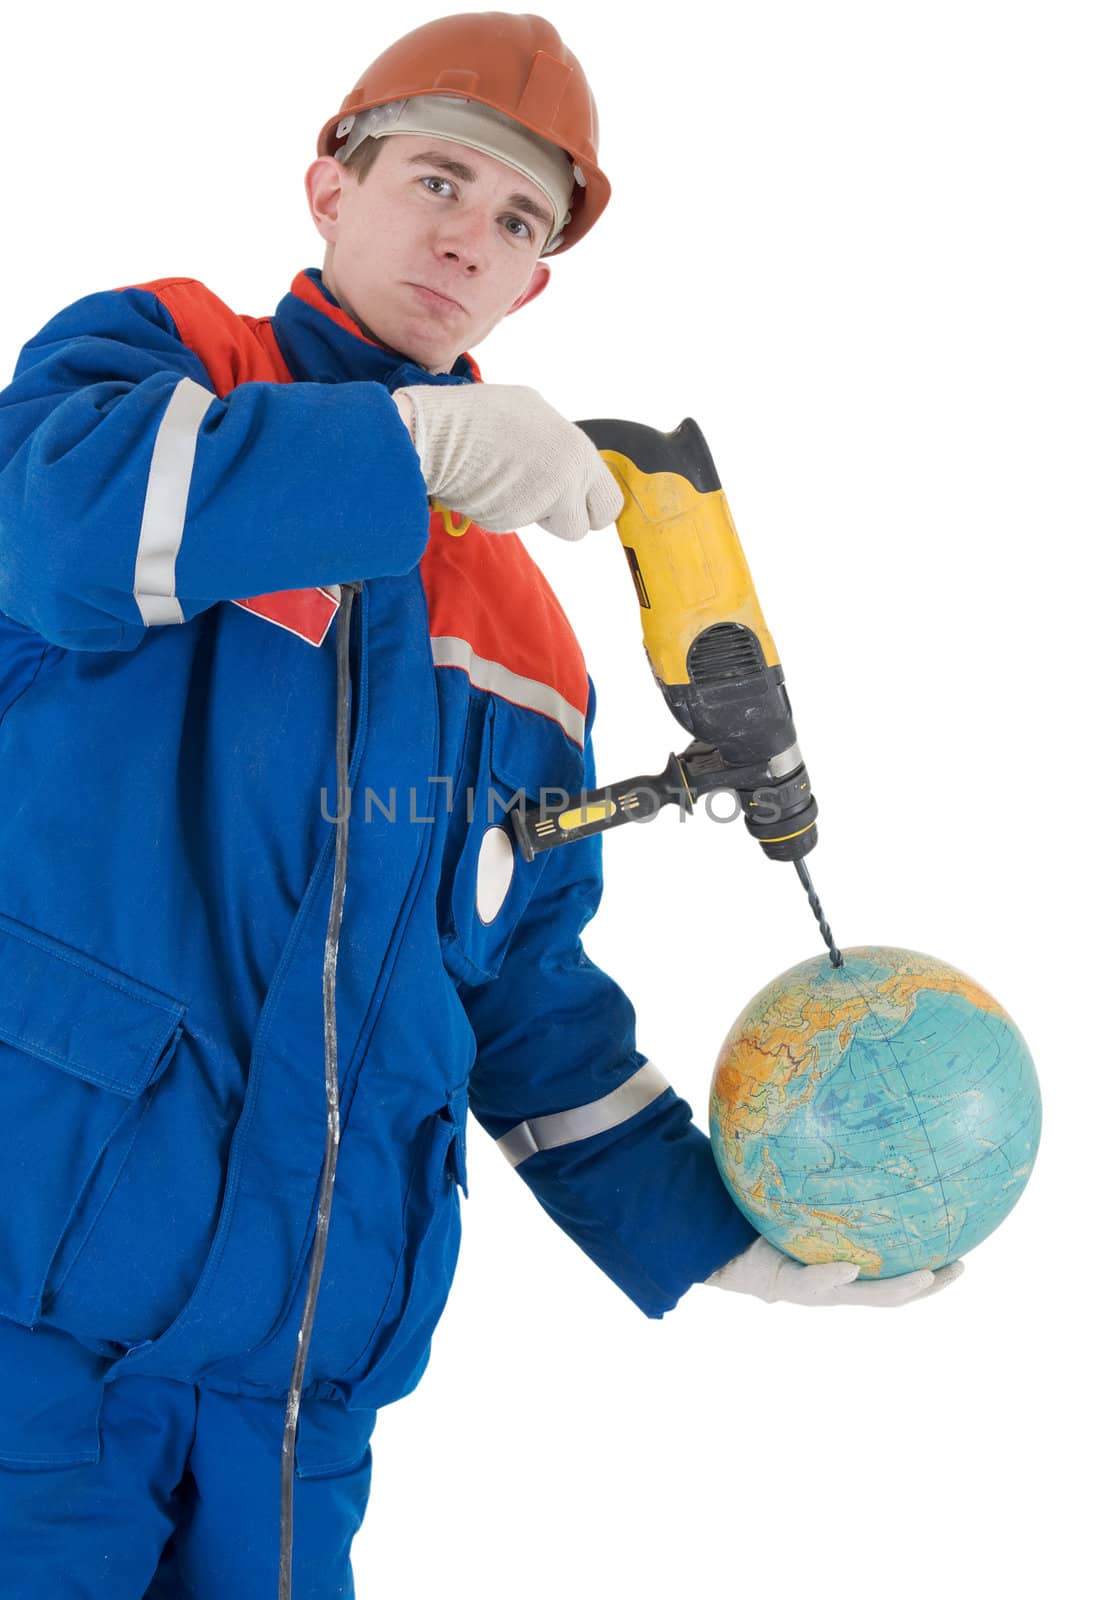 Laborer with hand drill and globe  by pzaxe